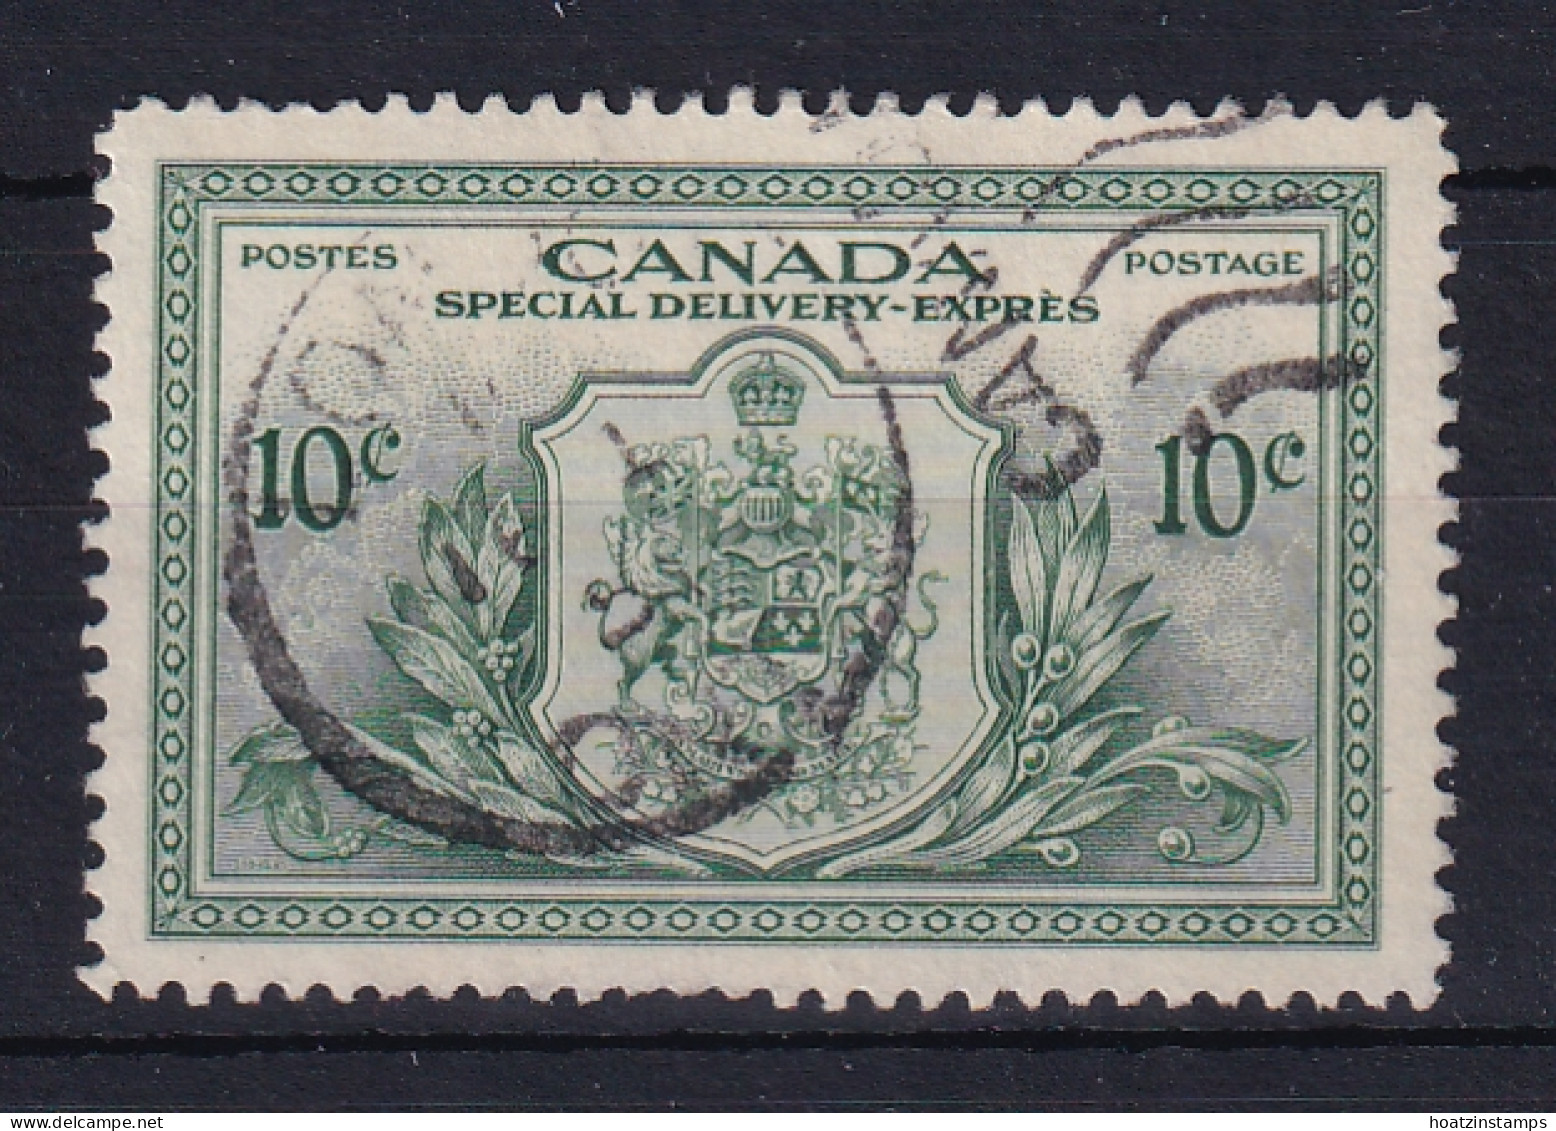 Canada: 1946   Special Delivery   SG S15    10c   Used - Special Delivery